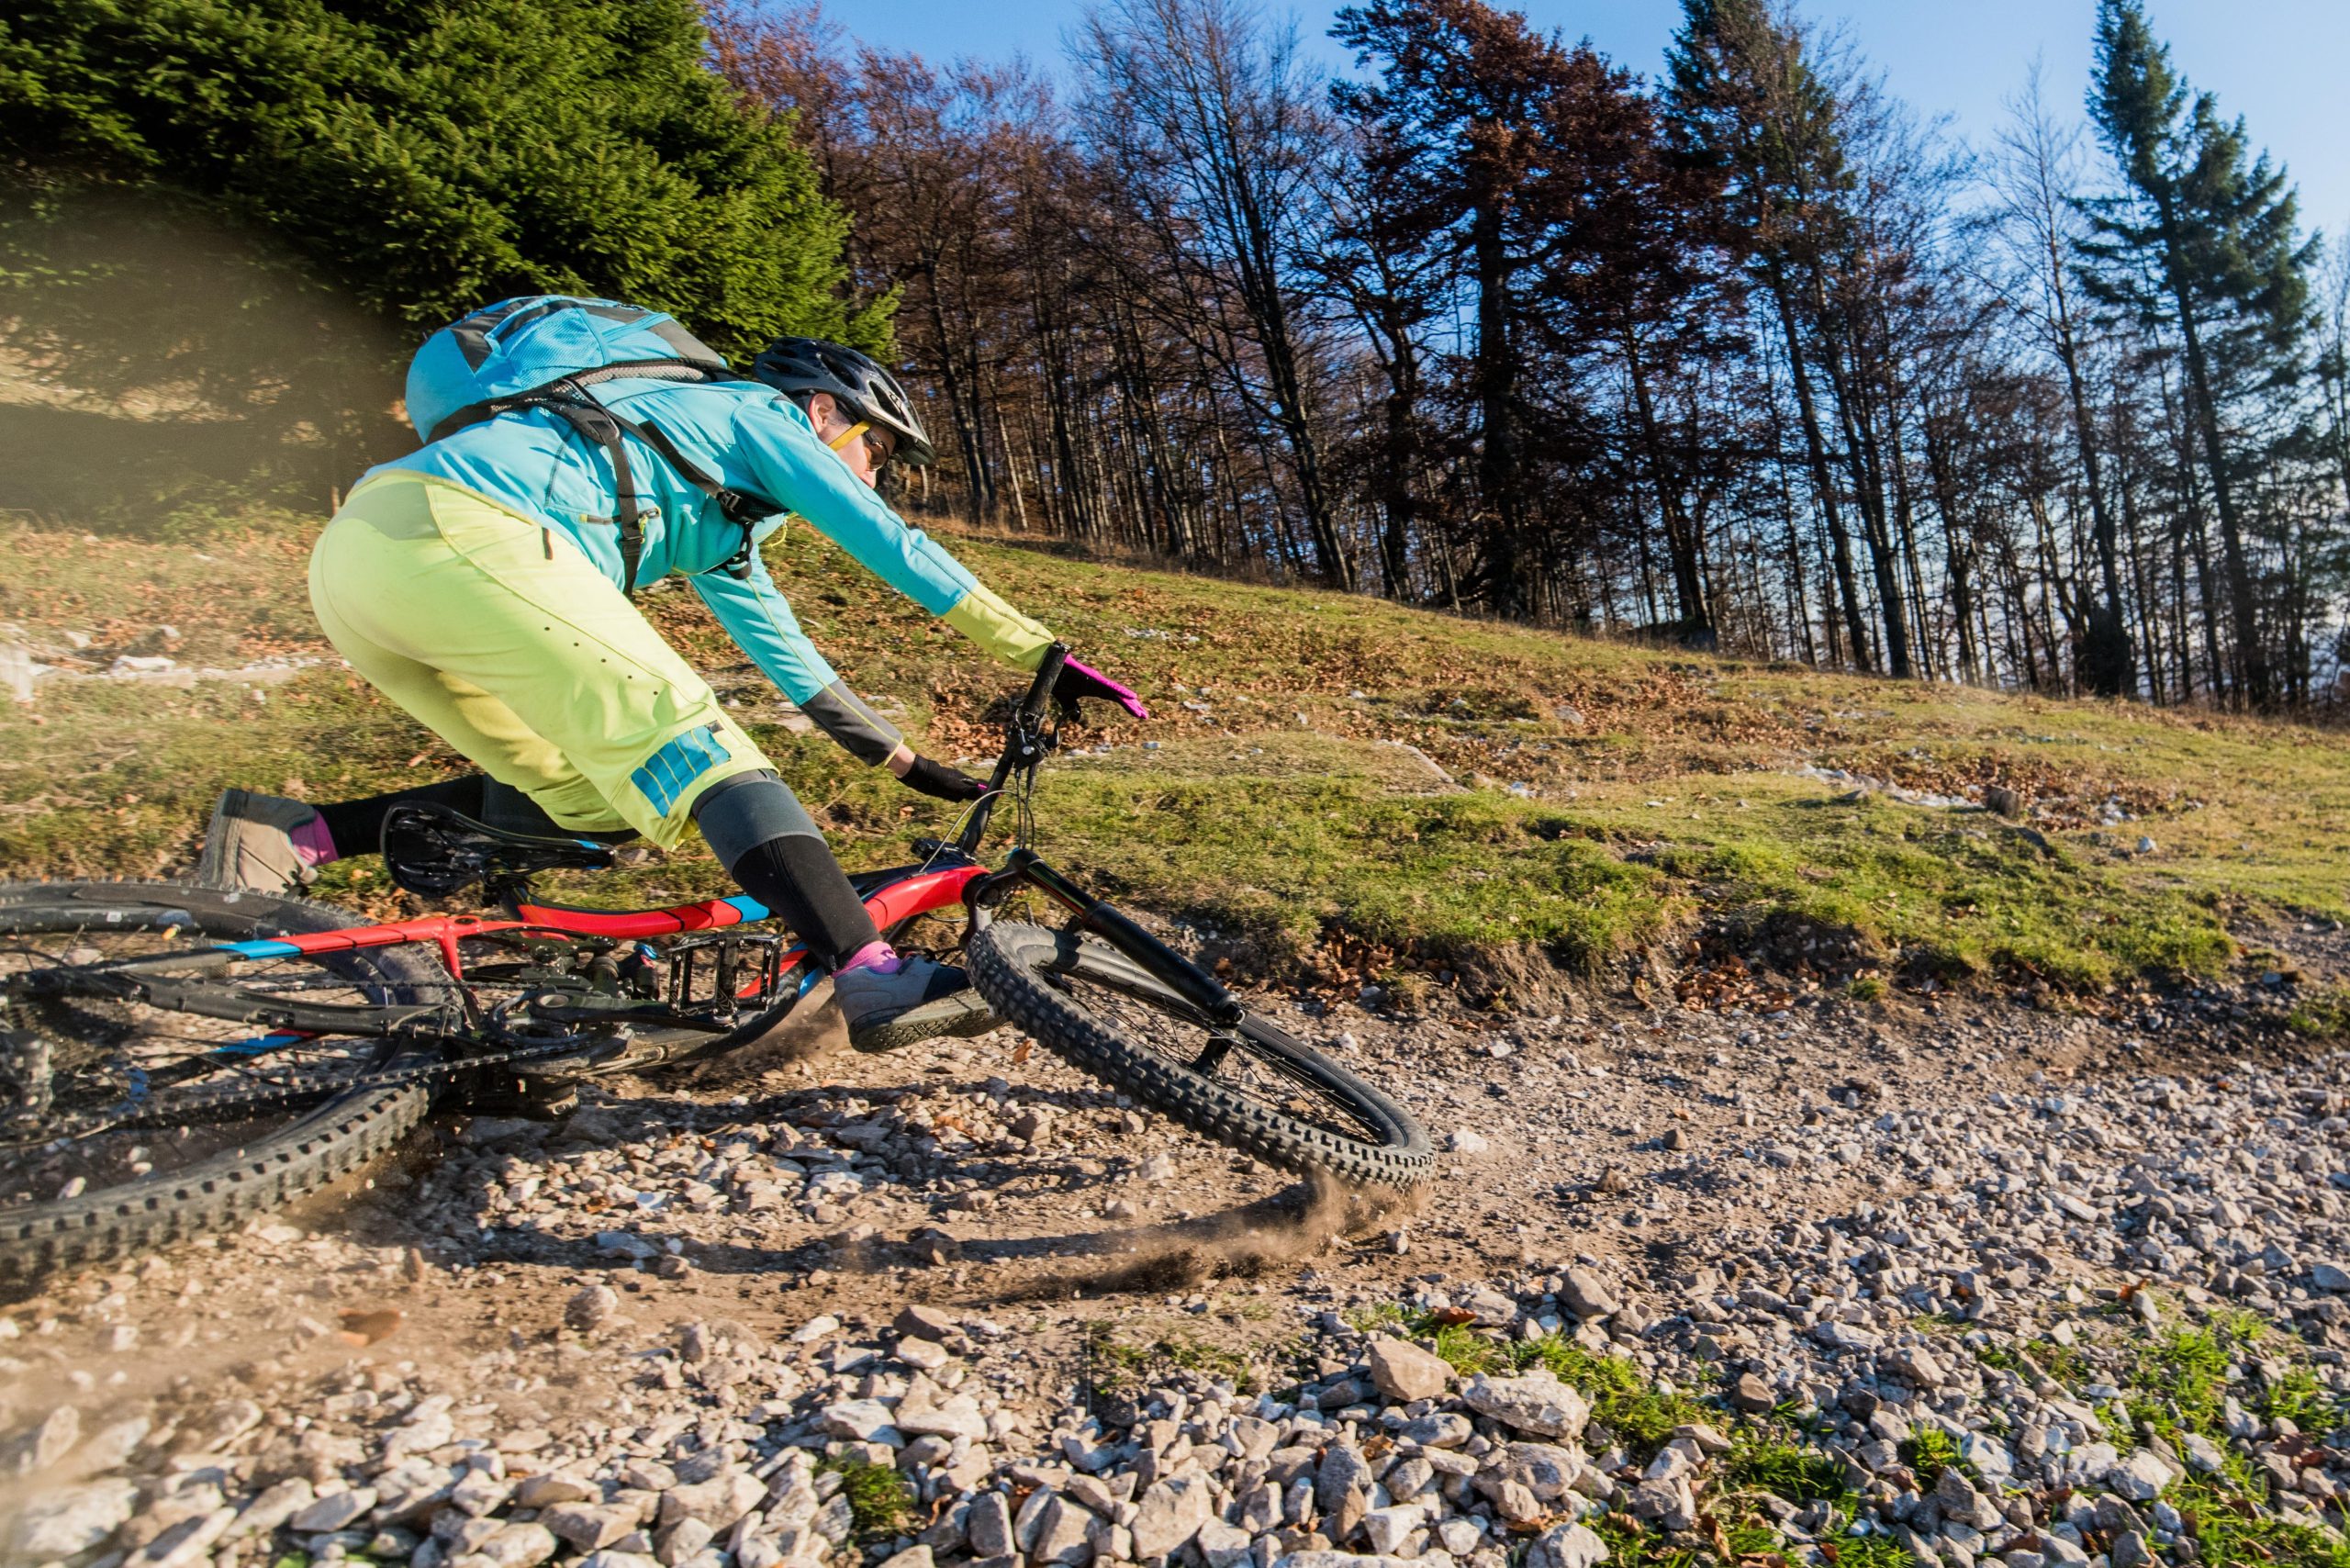 How to Improve Recovery From Mountain Bike Injuries